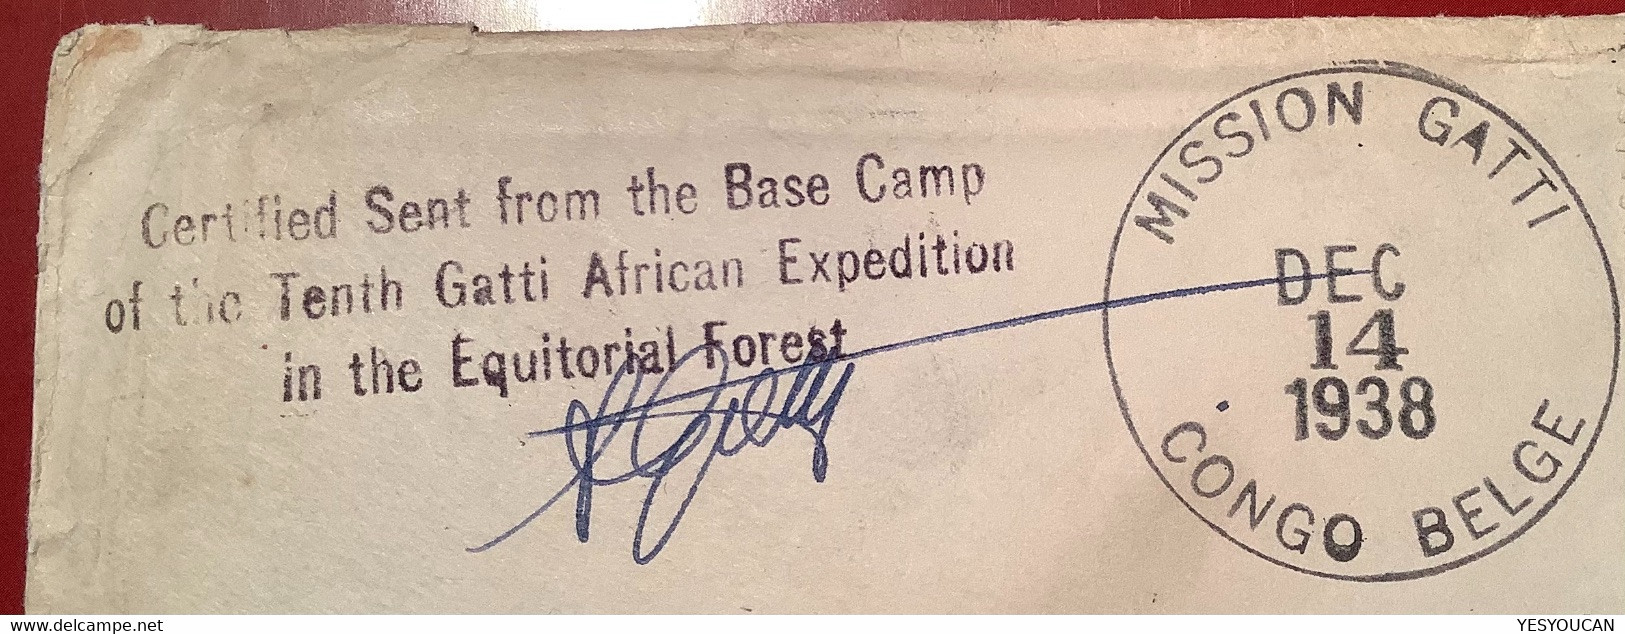 MISSION GATTI CONGO BELGE 1938 Cover>CANADA RRR ! STANLEYVILLE+BASE CAMP10th AFRICAN EXPEDITION EQUATORIAL FOREST(lettre - Lettres & Documents